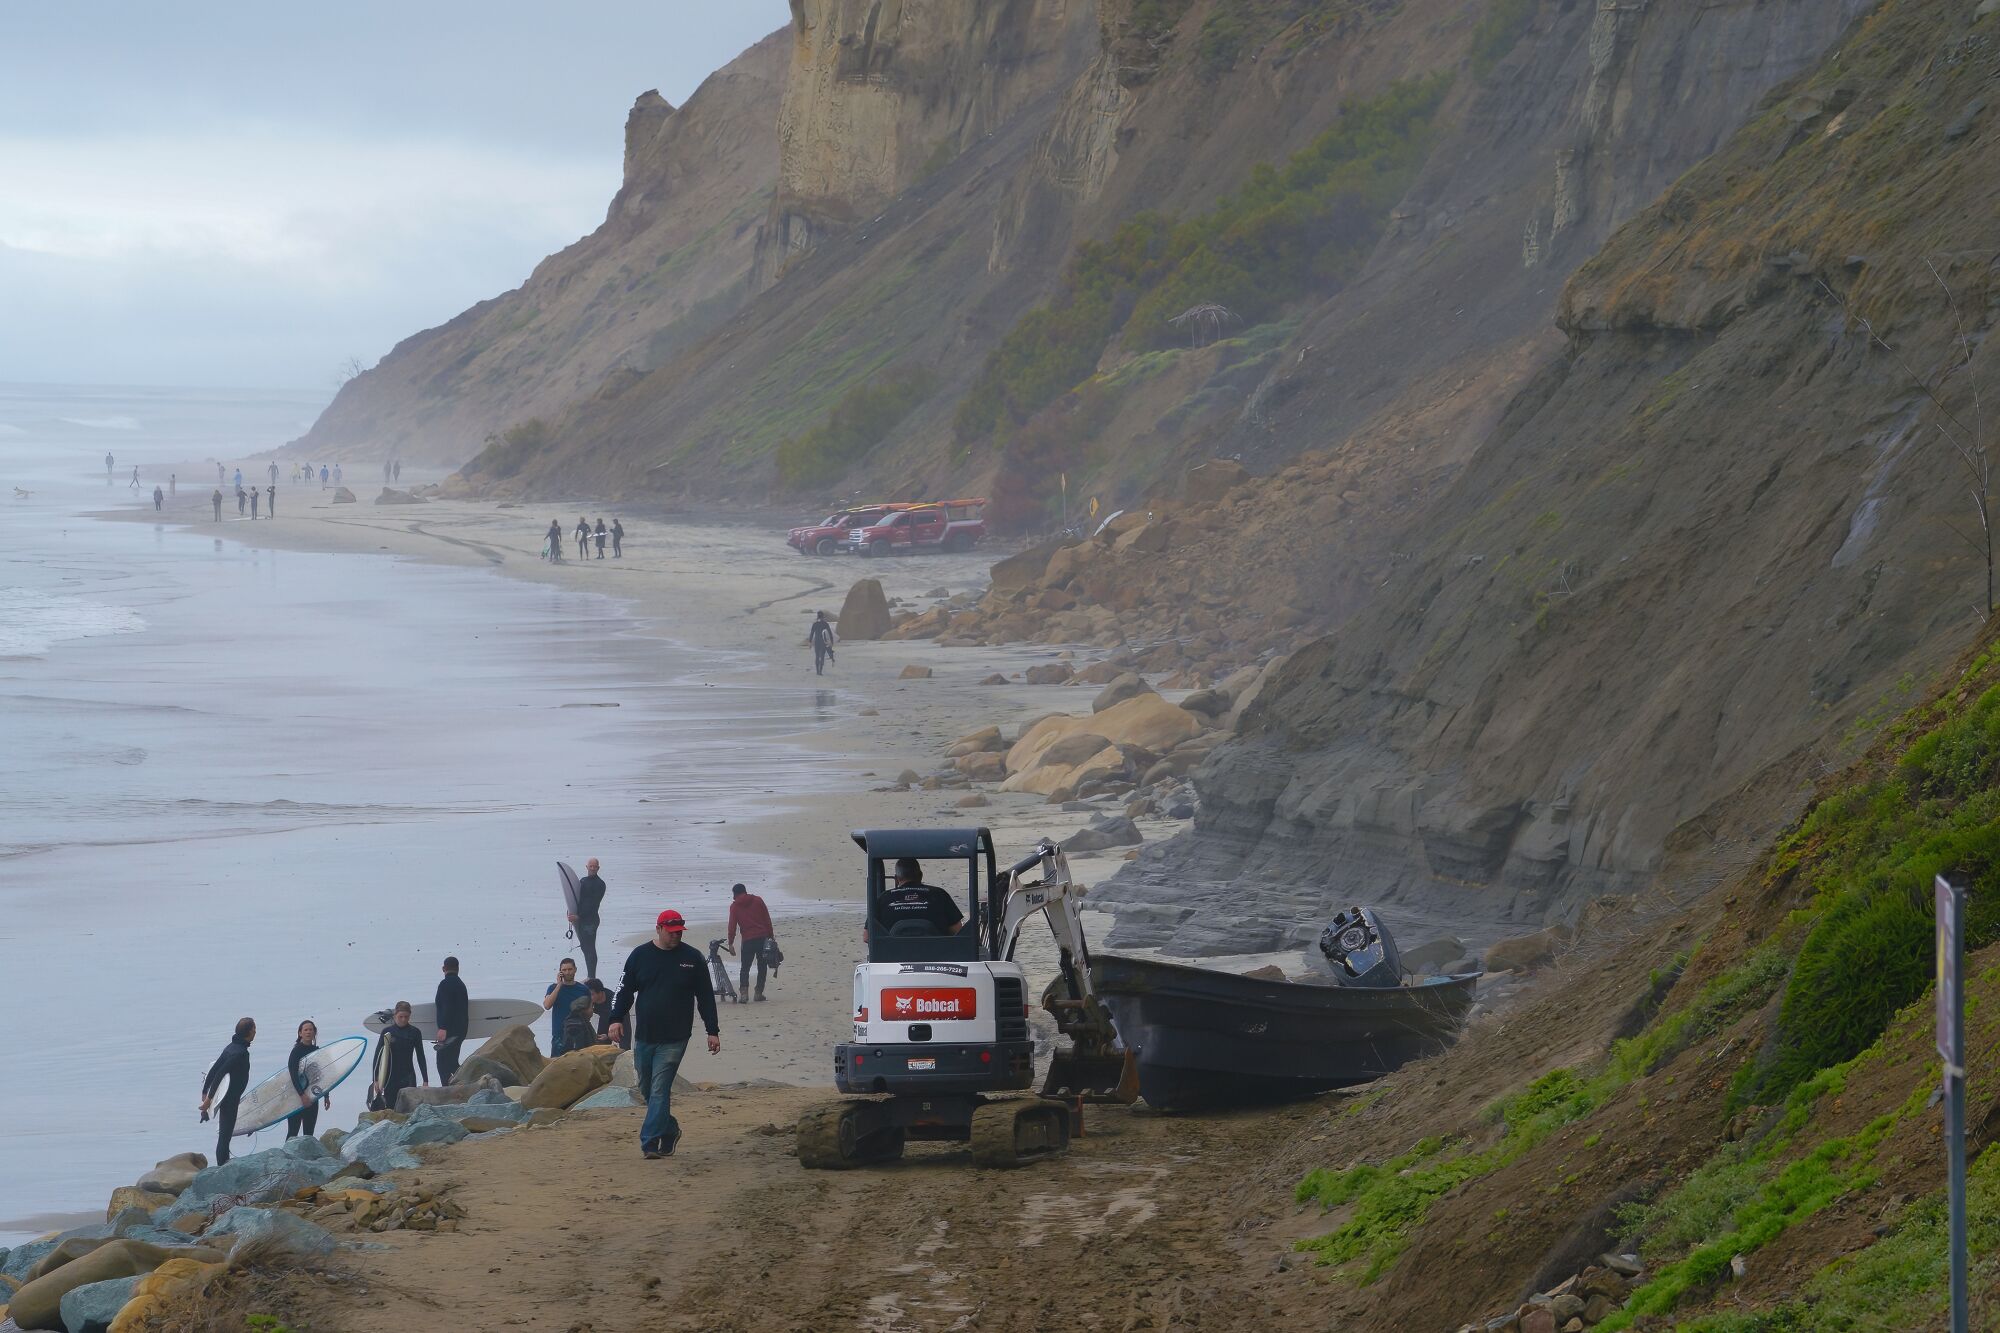 A crew begins to haul away a panga on March 12 at Black's Beach after it and another boat overturned the night before.